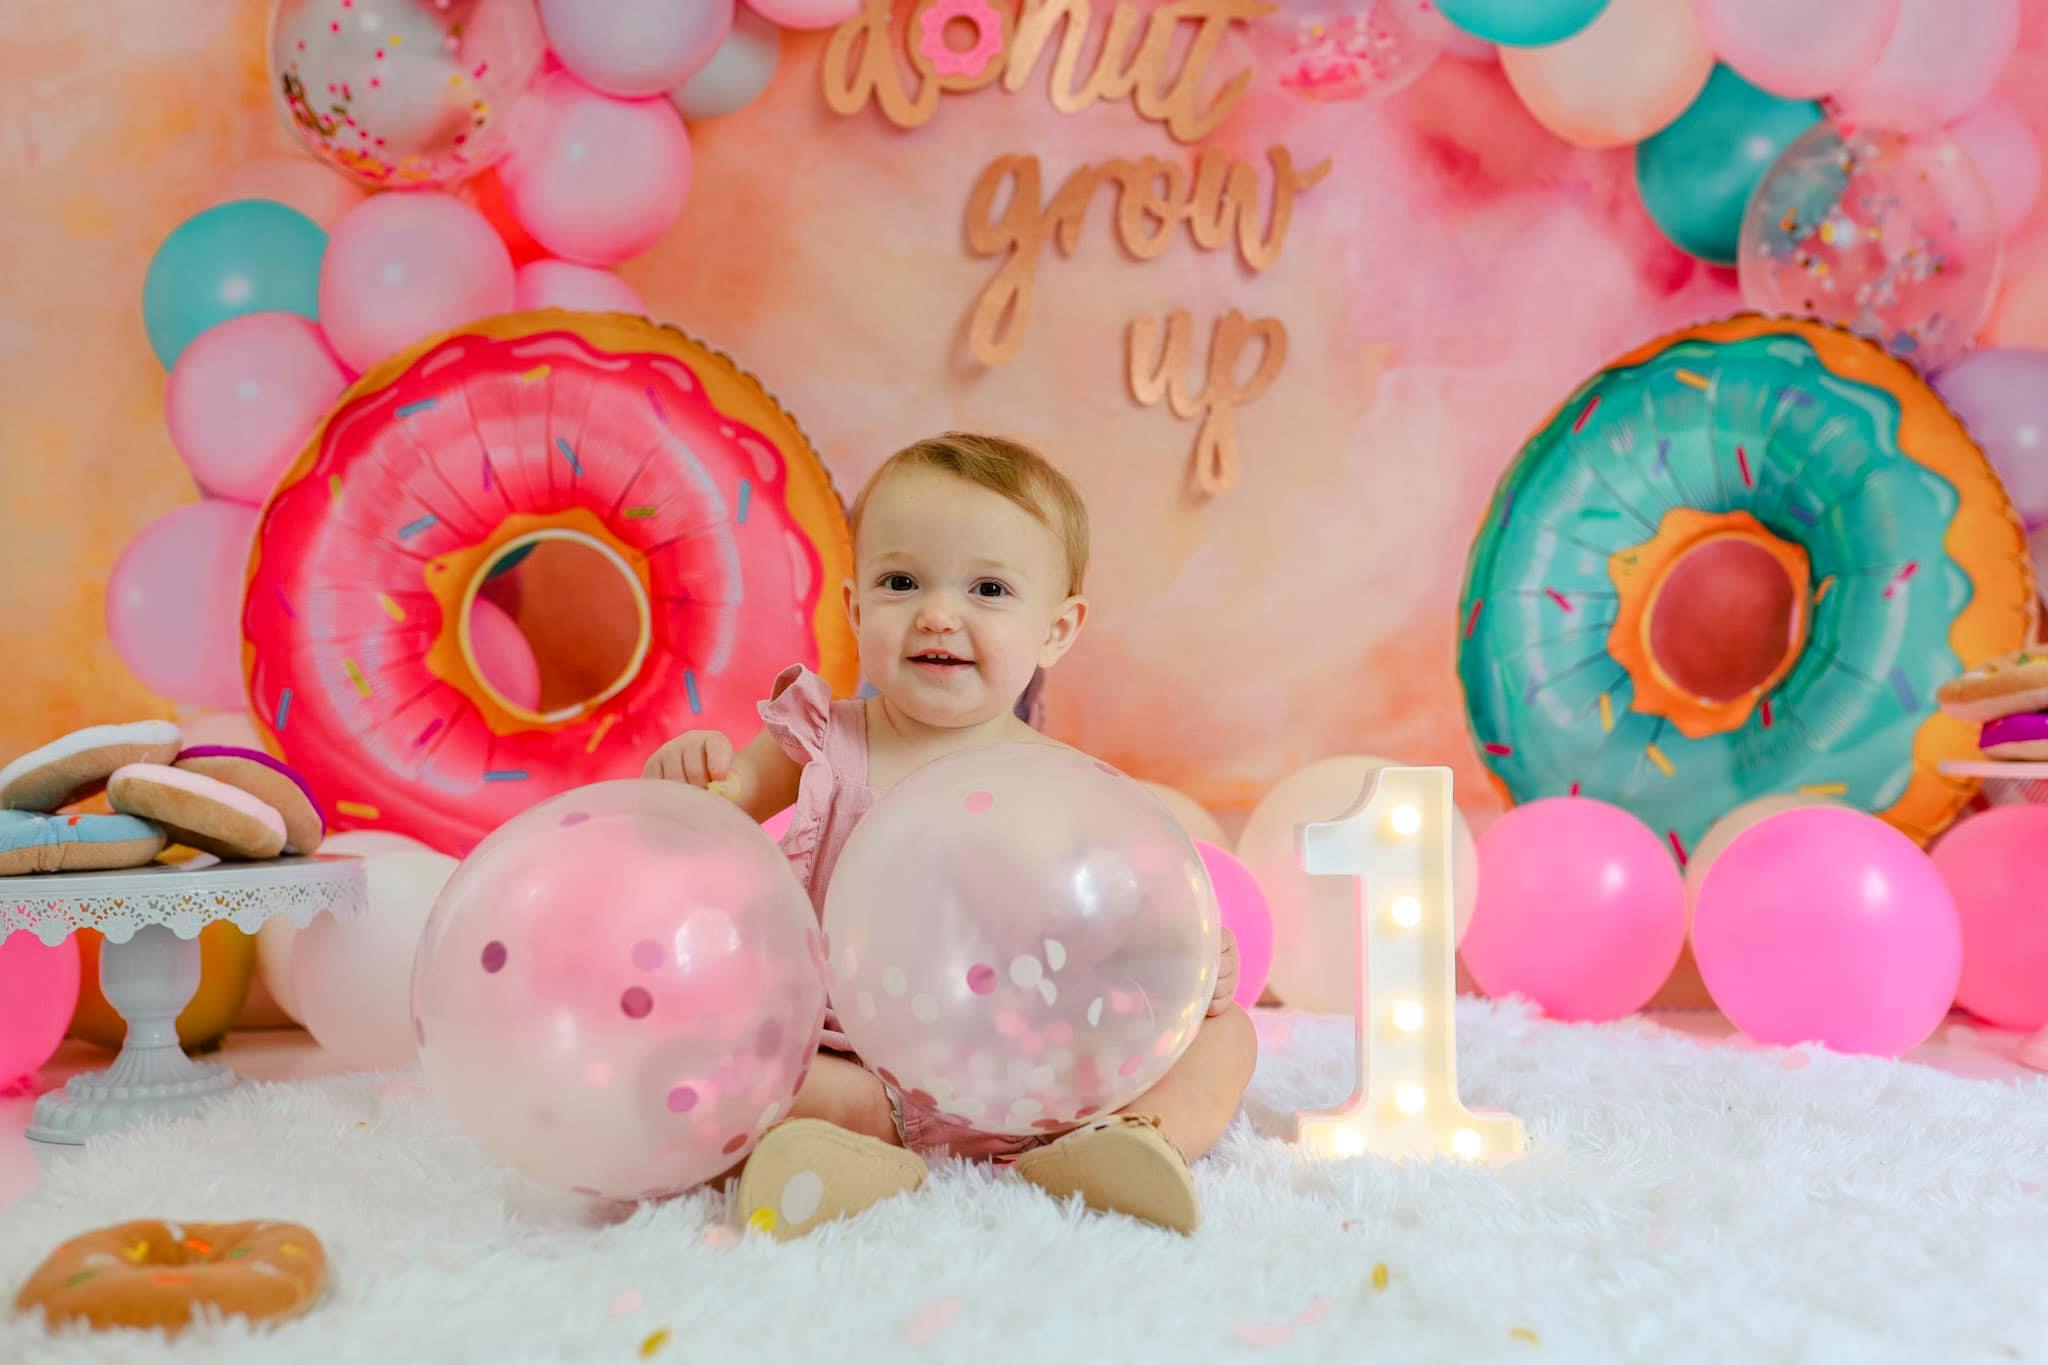 Kate Cake Smash Donut Balloon Backdrop Designed by Emetselch (only ship to Canada)